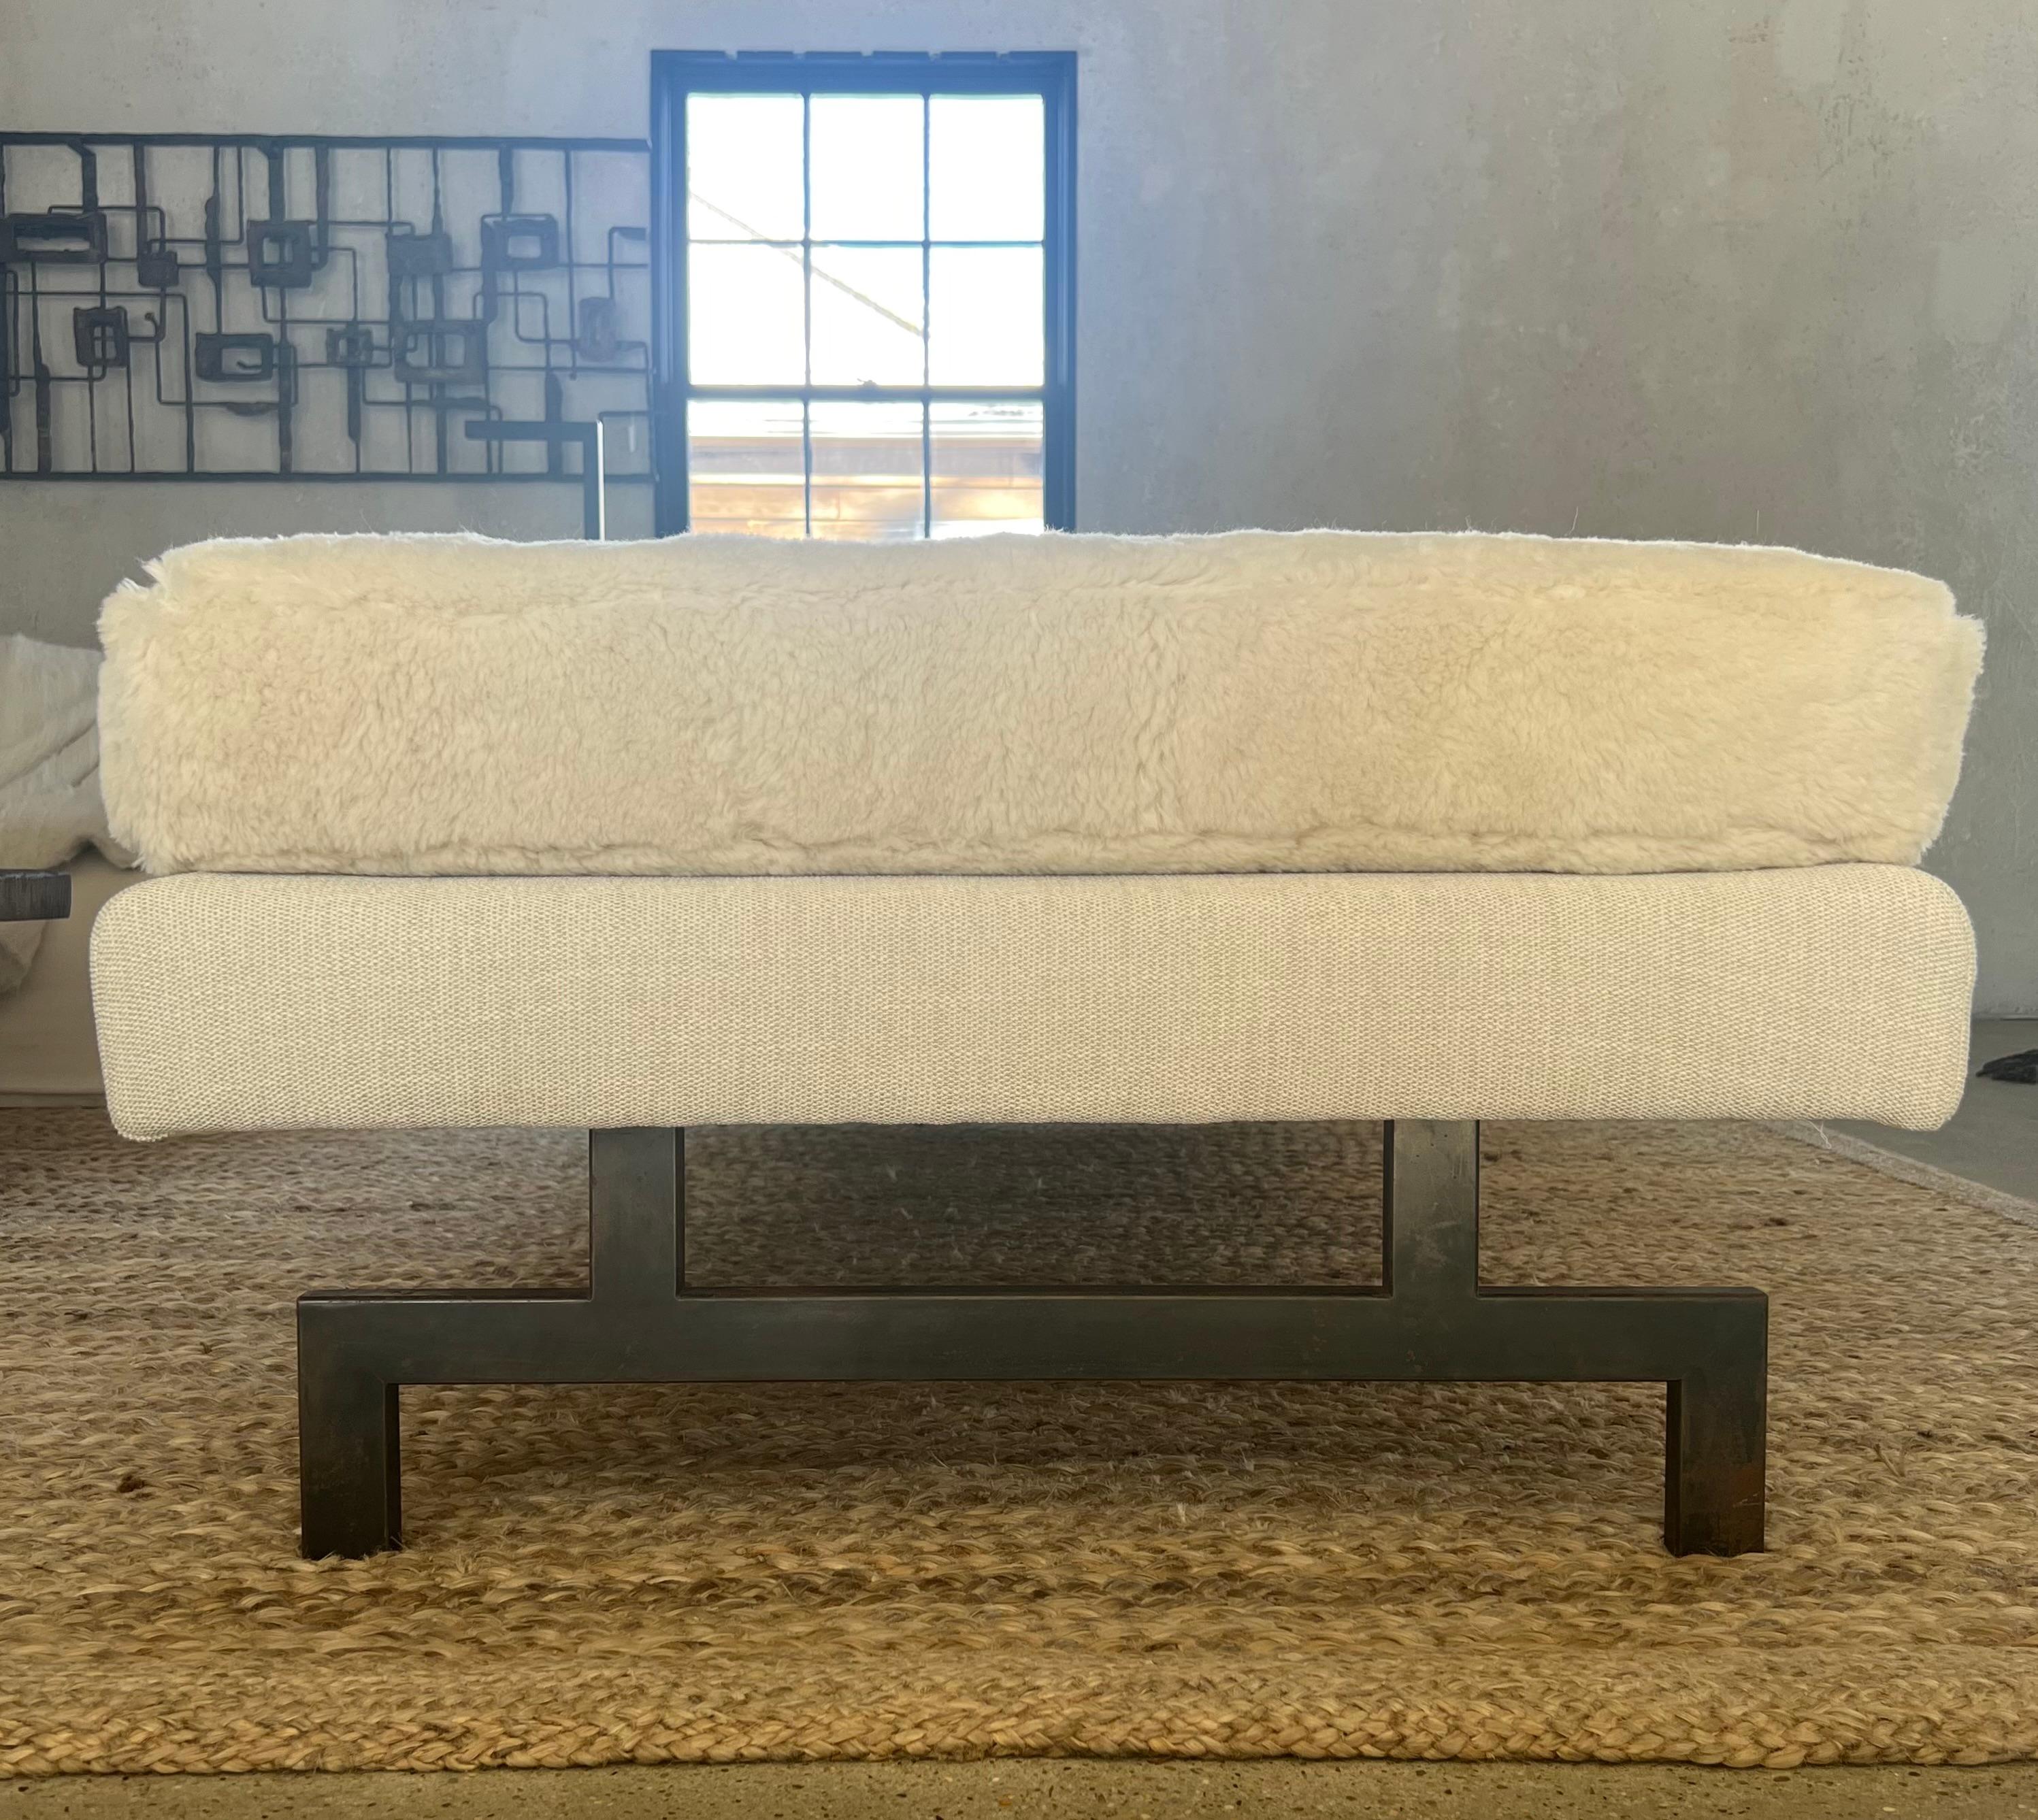 The Lake Forest Daybed by Michael Del Piero In New Condition For Sale In Chicago, IL